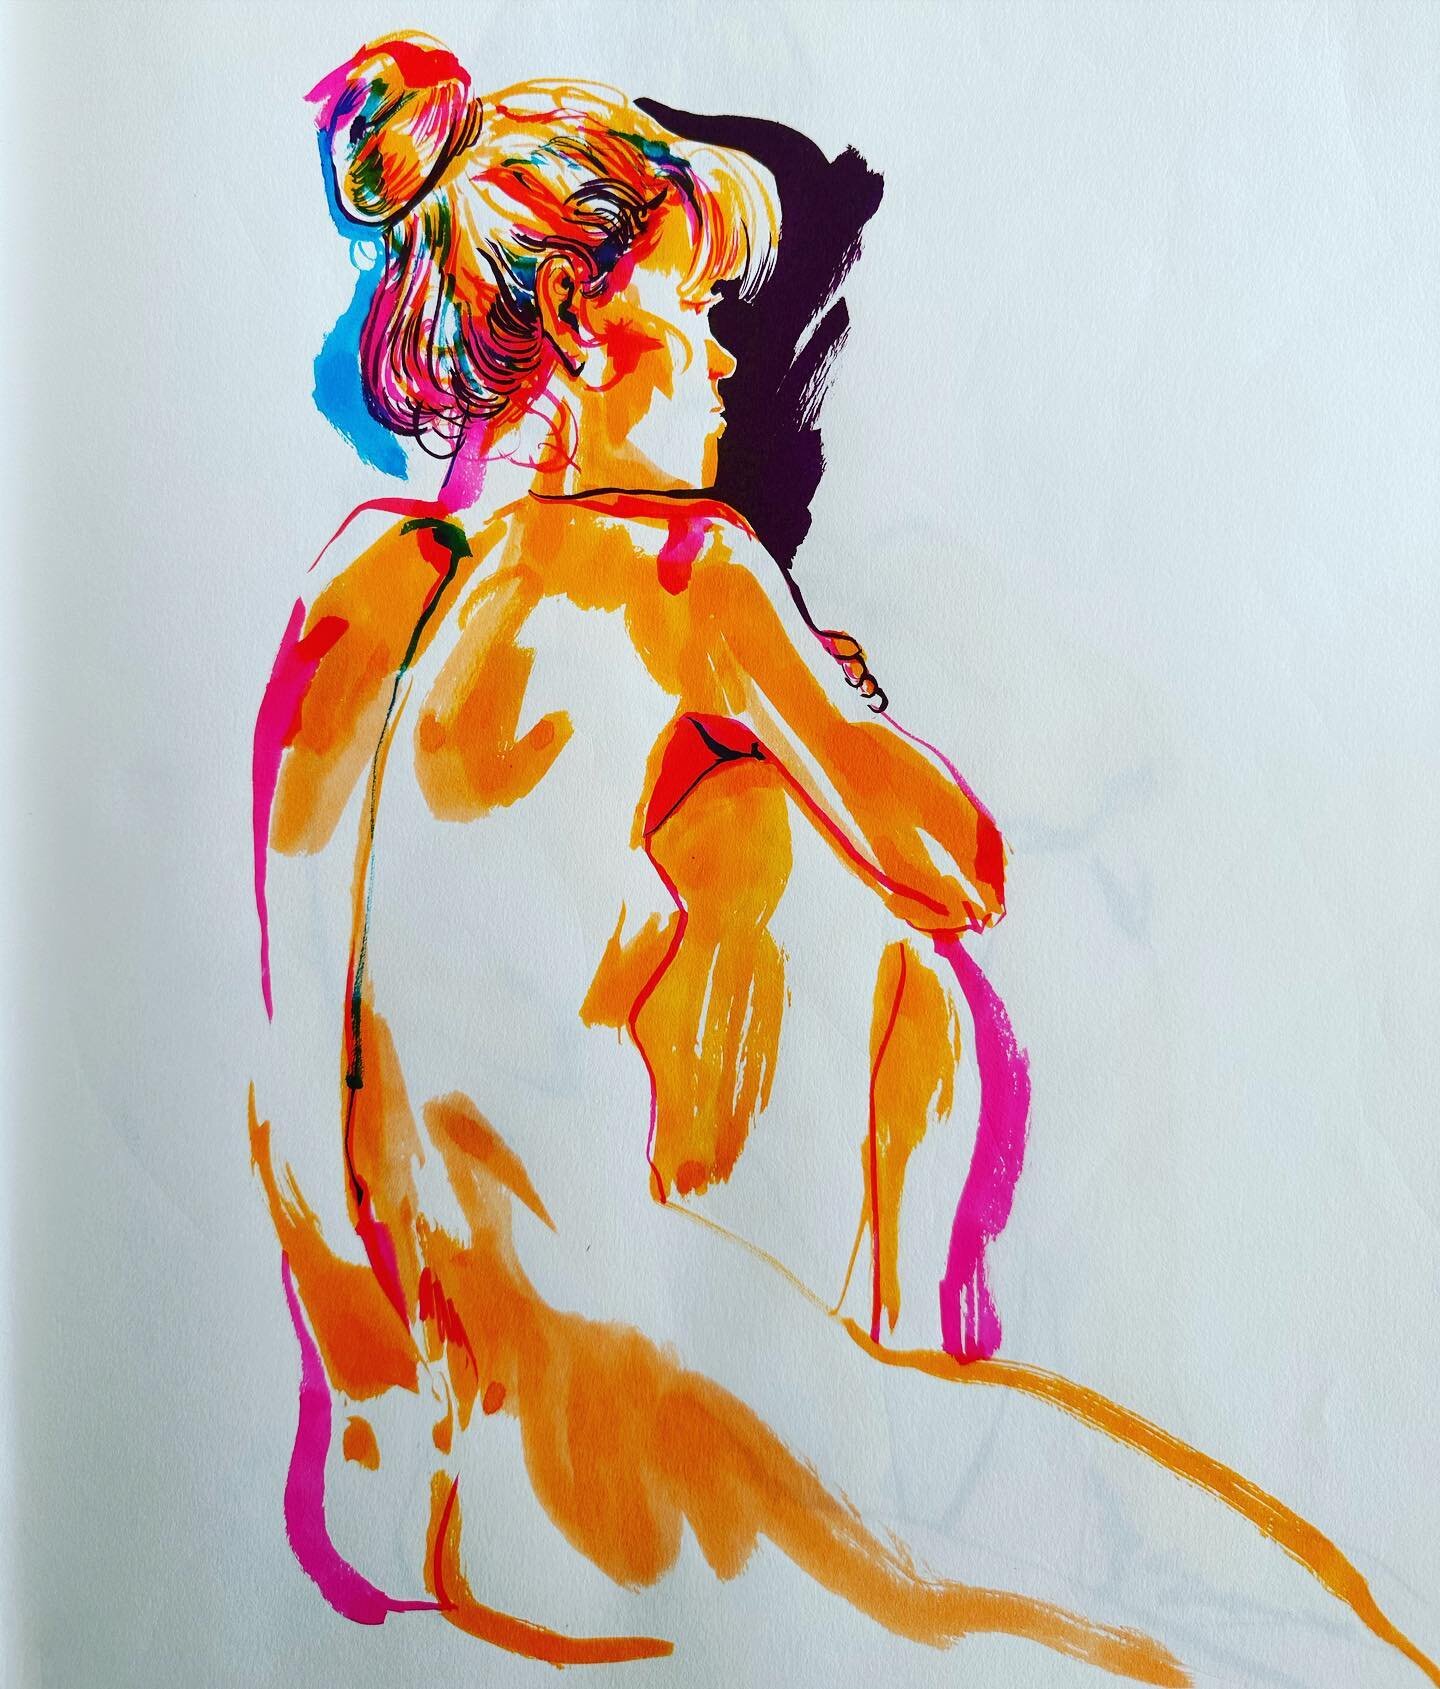 @emilycolechicago throughout the months @silhouette_and_shadow 
.
.
#figuredrawing #modeling #artoftheday #sketch #sketchbook